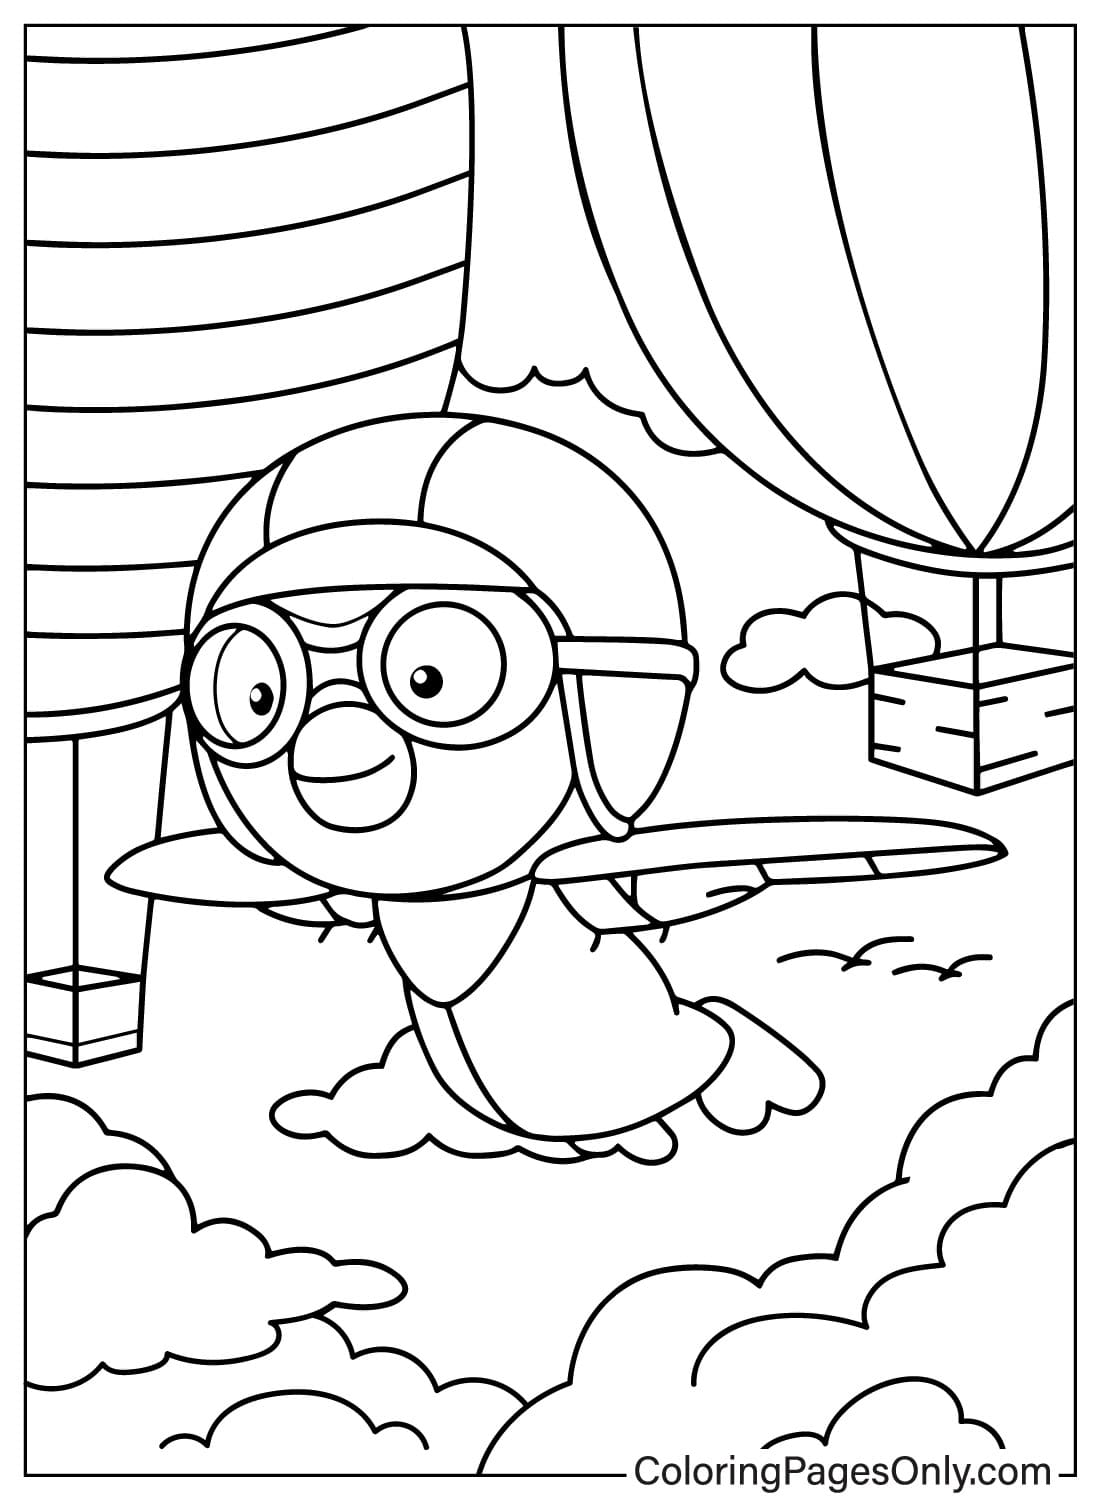 Pororo Coloring Book from Pororo the Little Penguin